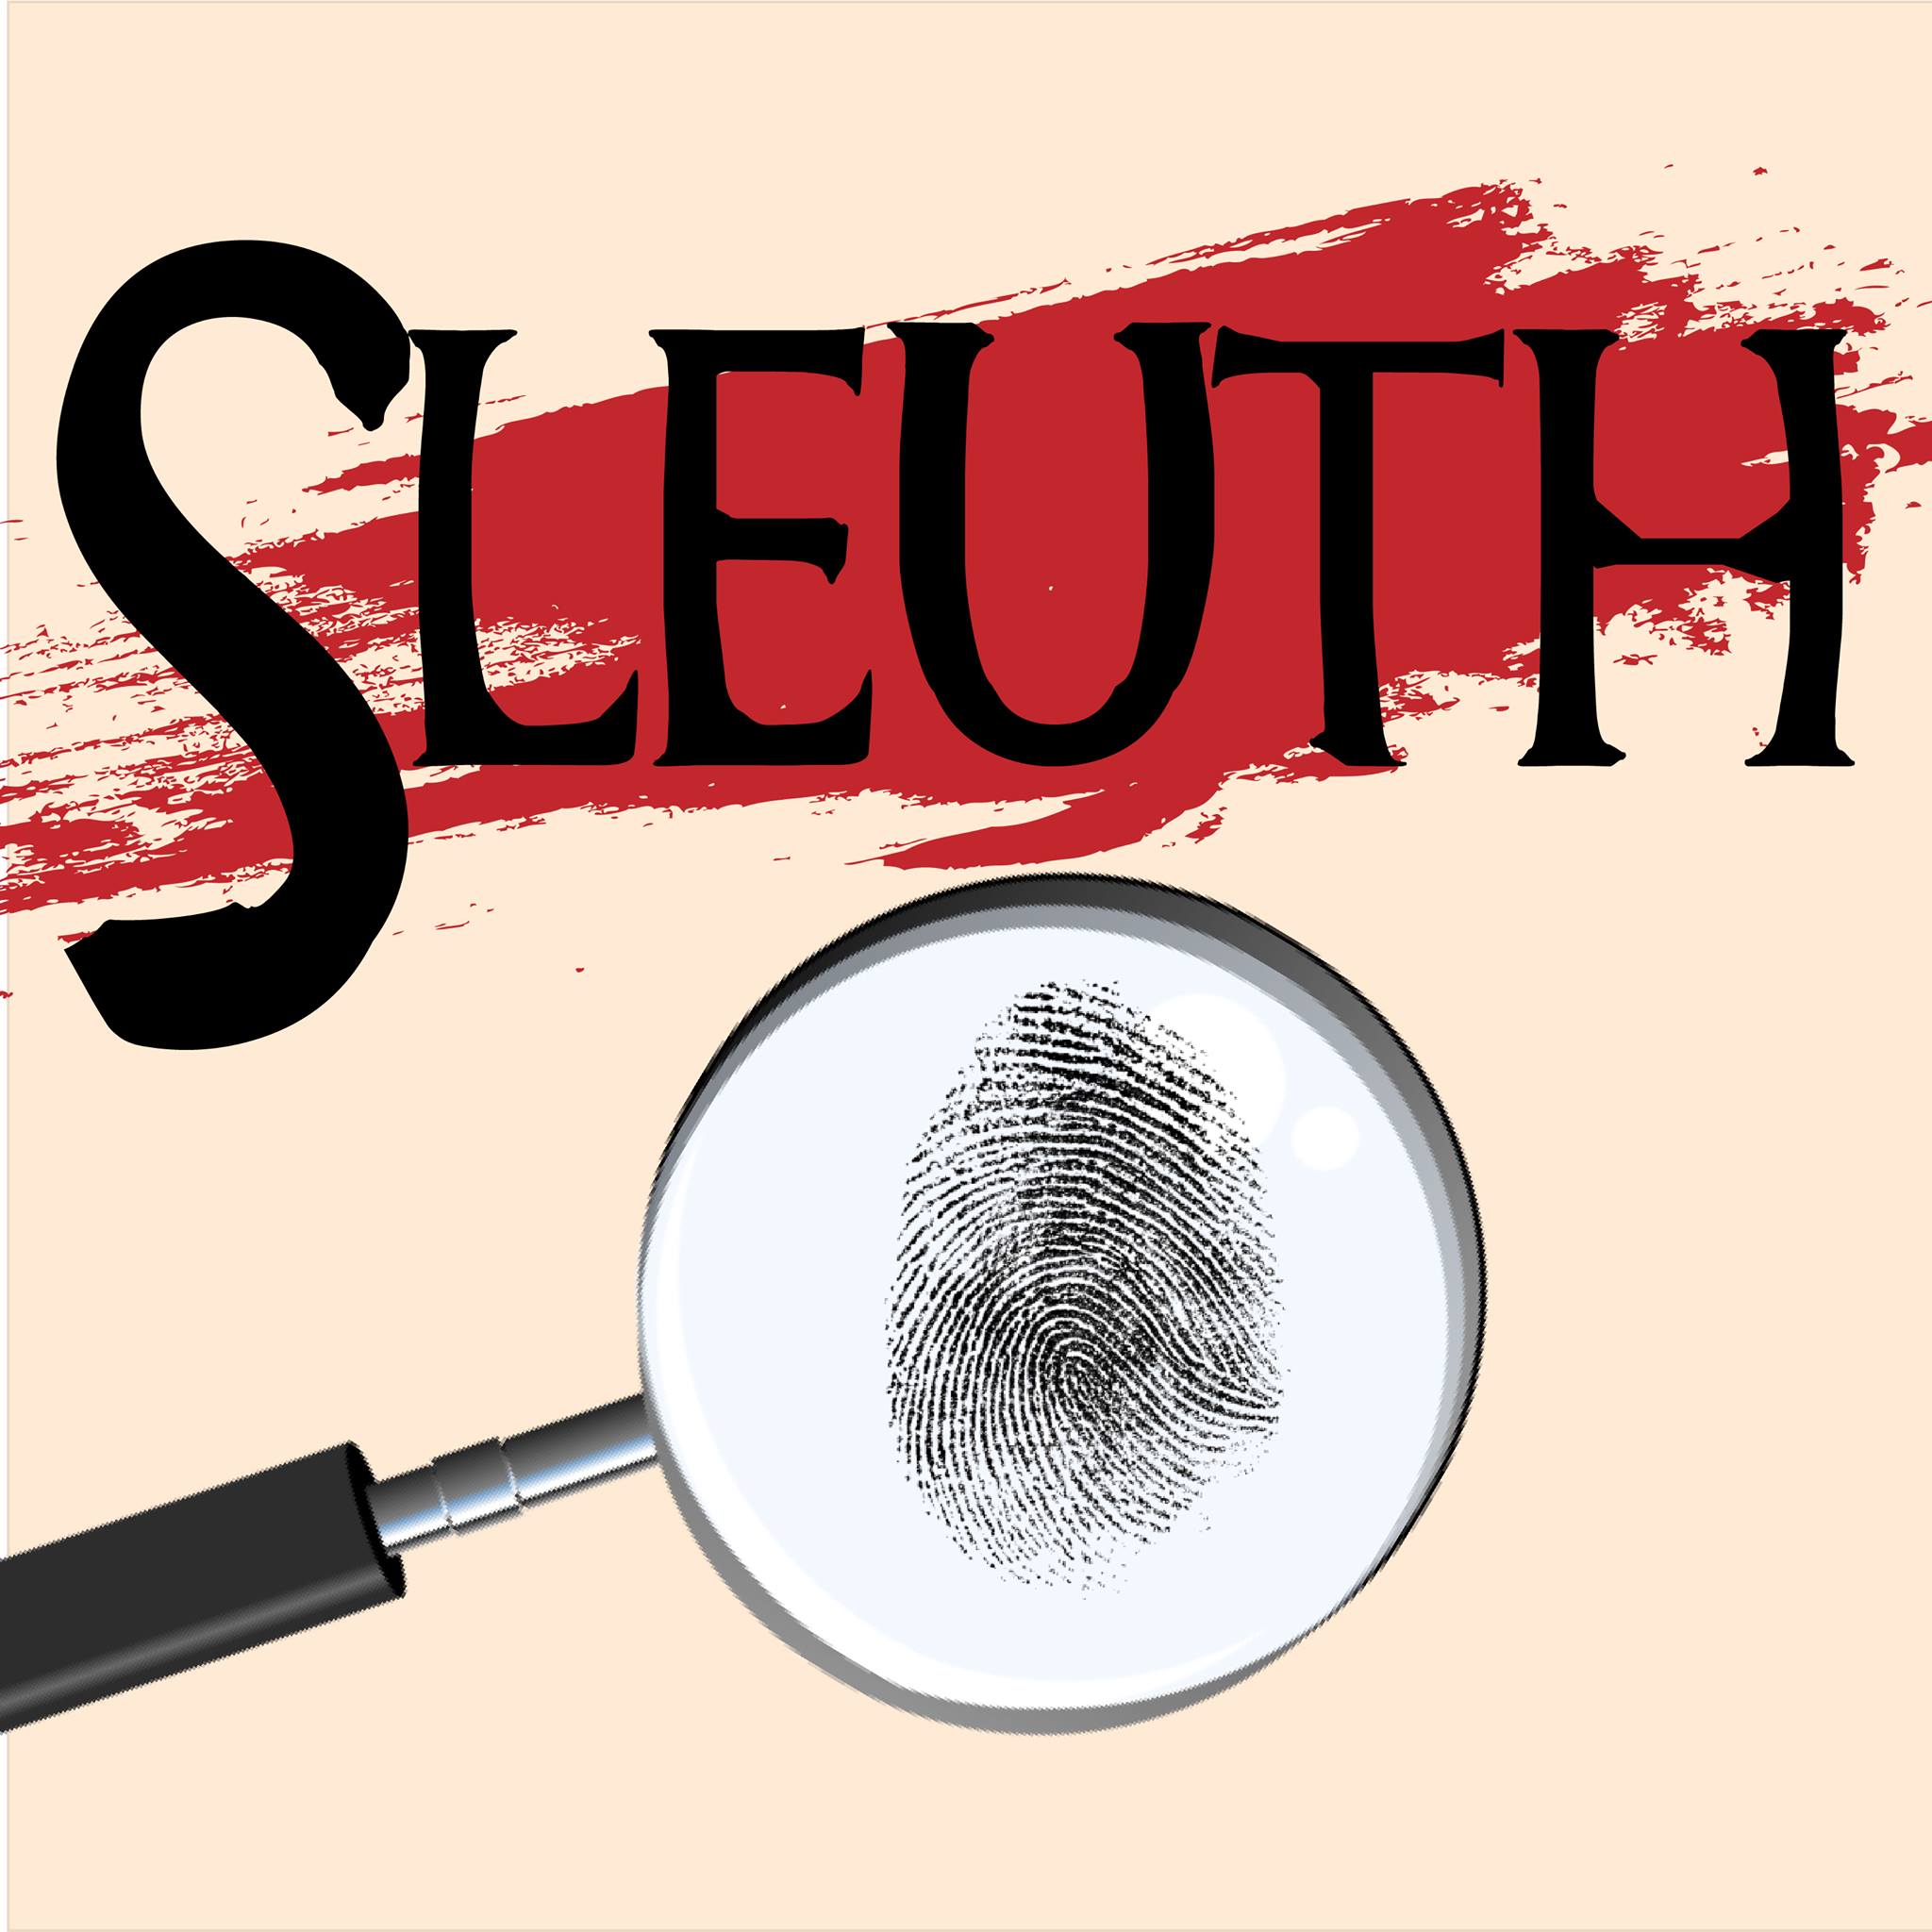 Sleuth by Wimberley Players